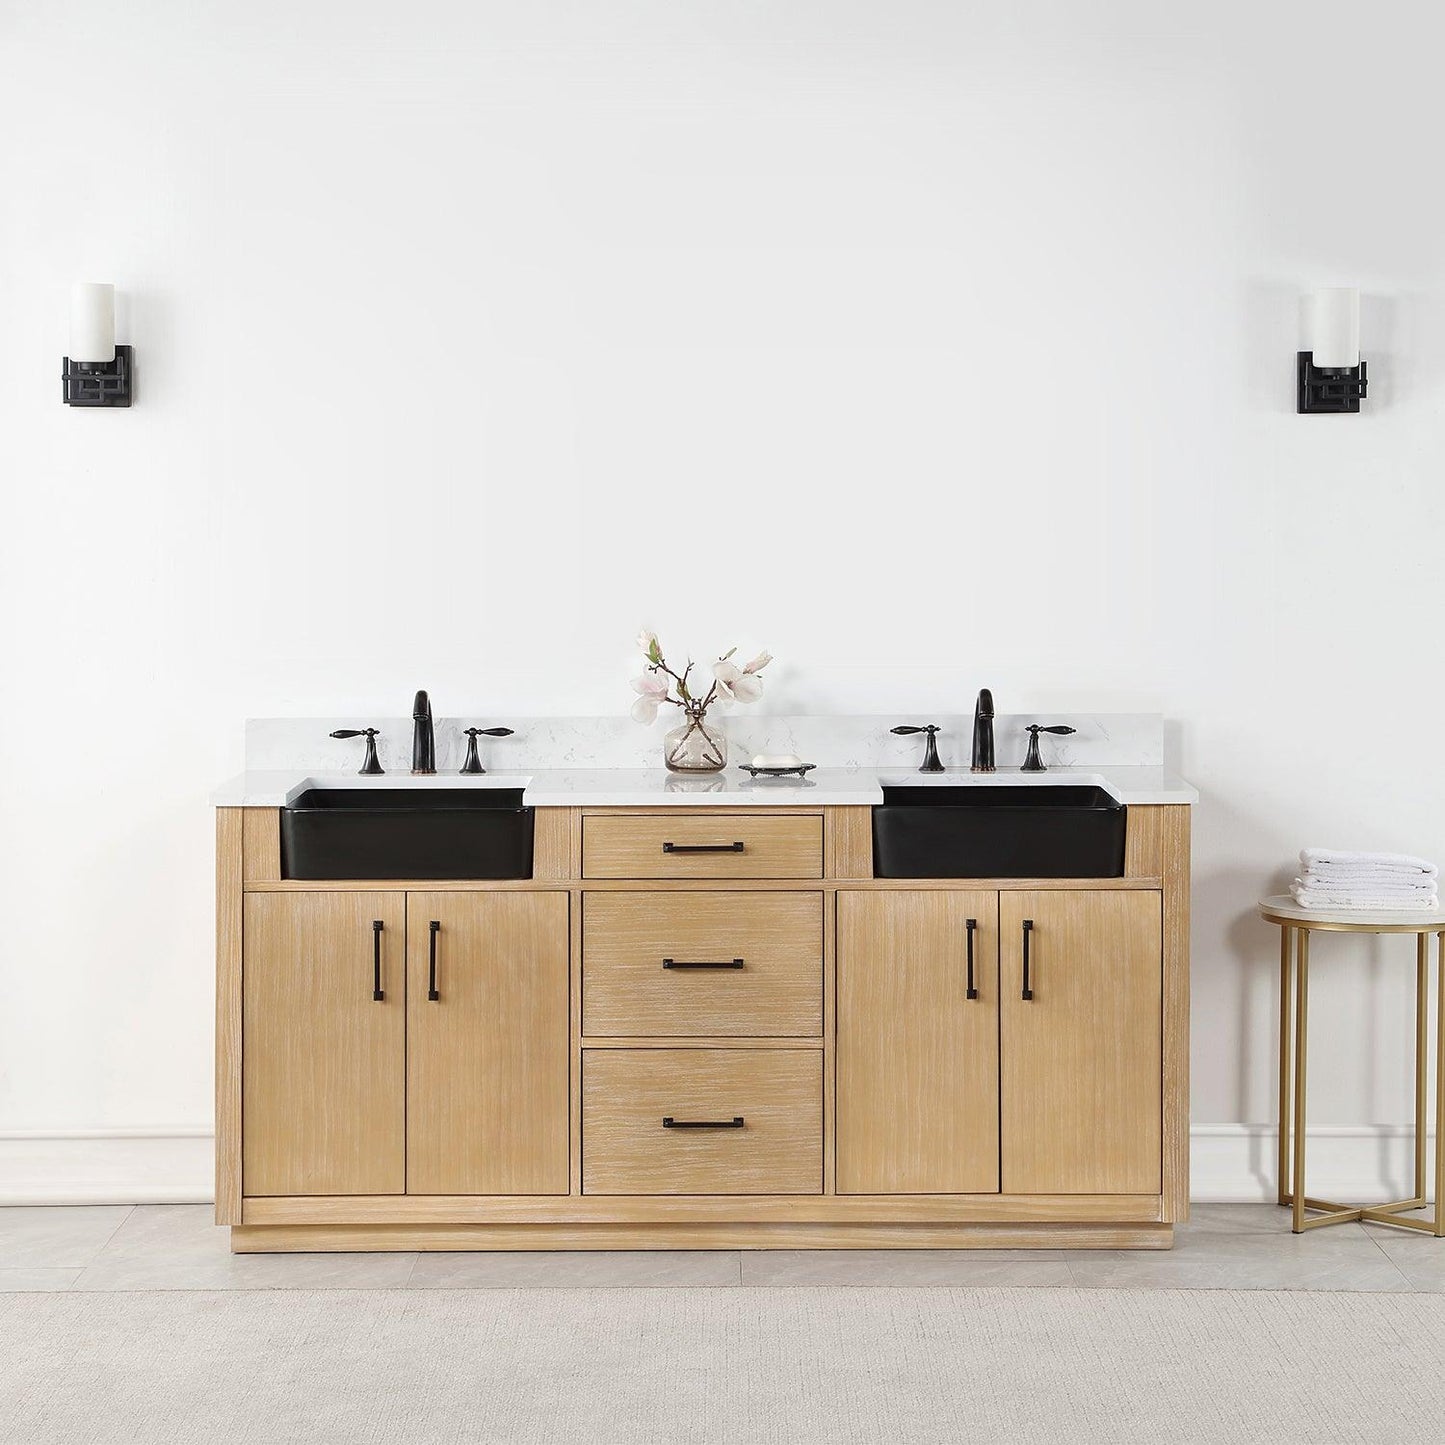 Altair Novago Double Bathroom Vanity in Weathered Pine with Aosta White Composite Stone Countertop and Farmhouse Sink with Optional Mirror - Sea & Stone Bath